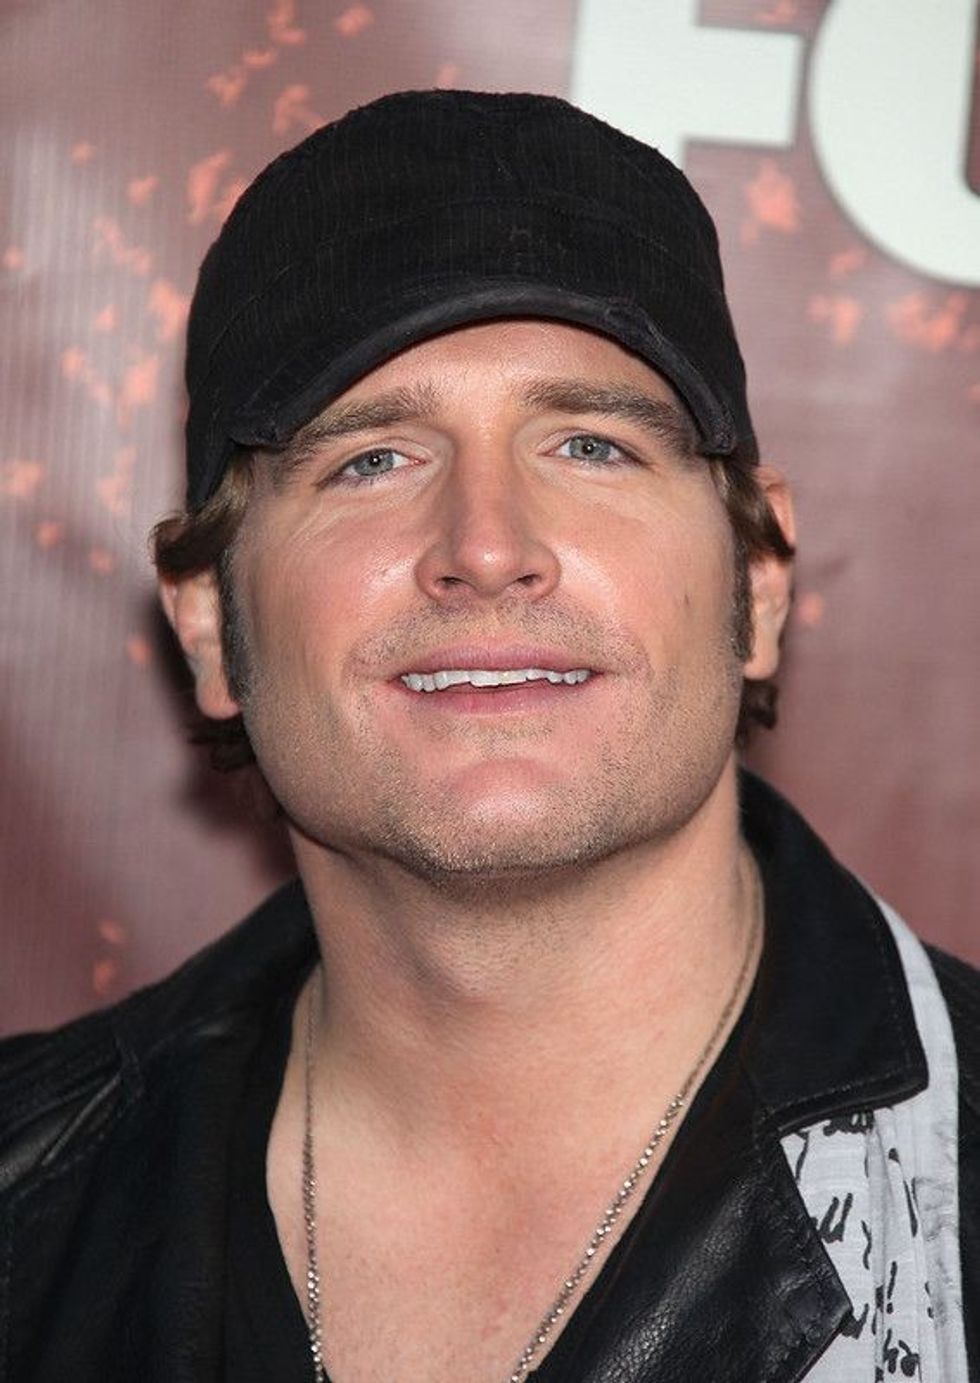 Jerrod Niemann has been influenced by country acts like Keith Whitley, George Strait, and Lefty Frizzwell.